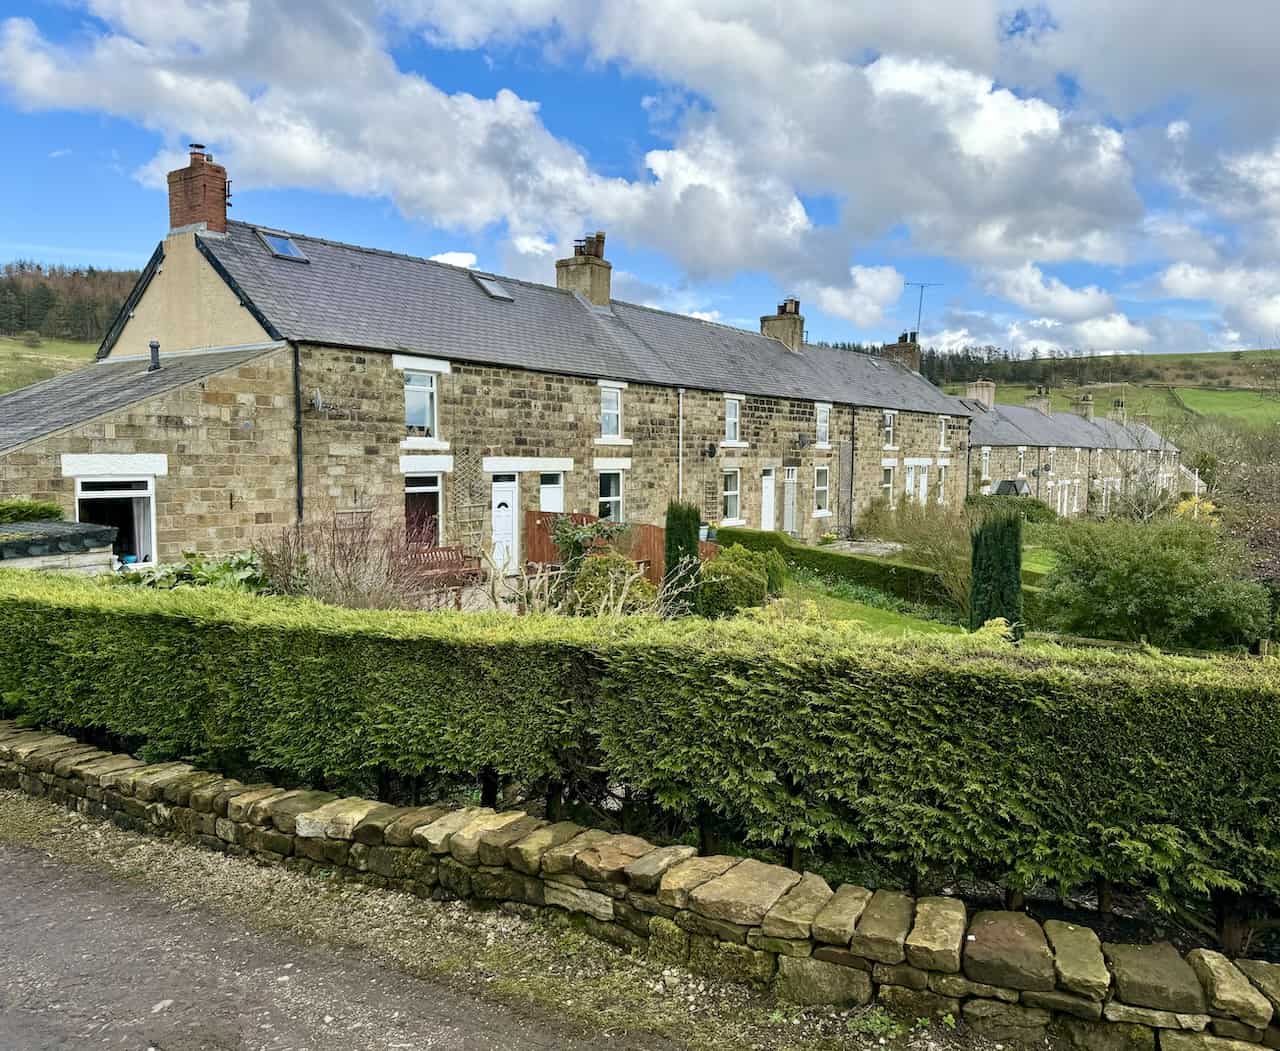 Charming terraced cottages along School Row, reflecting Rosedale East's residential heritage.
